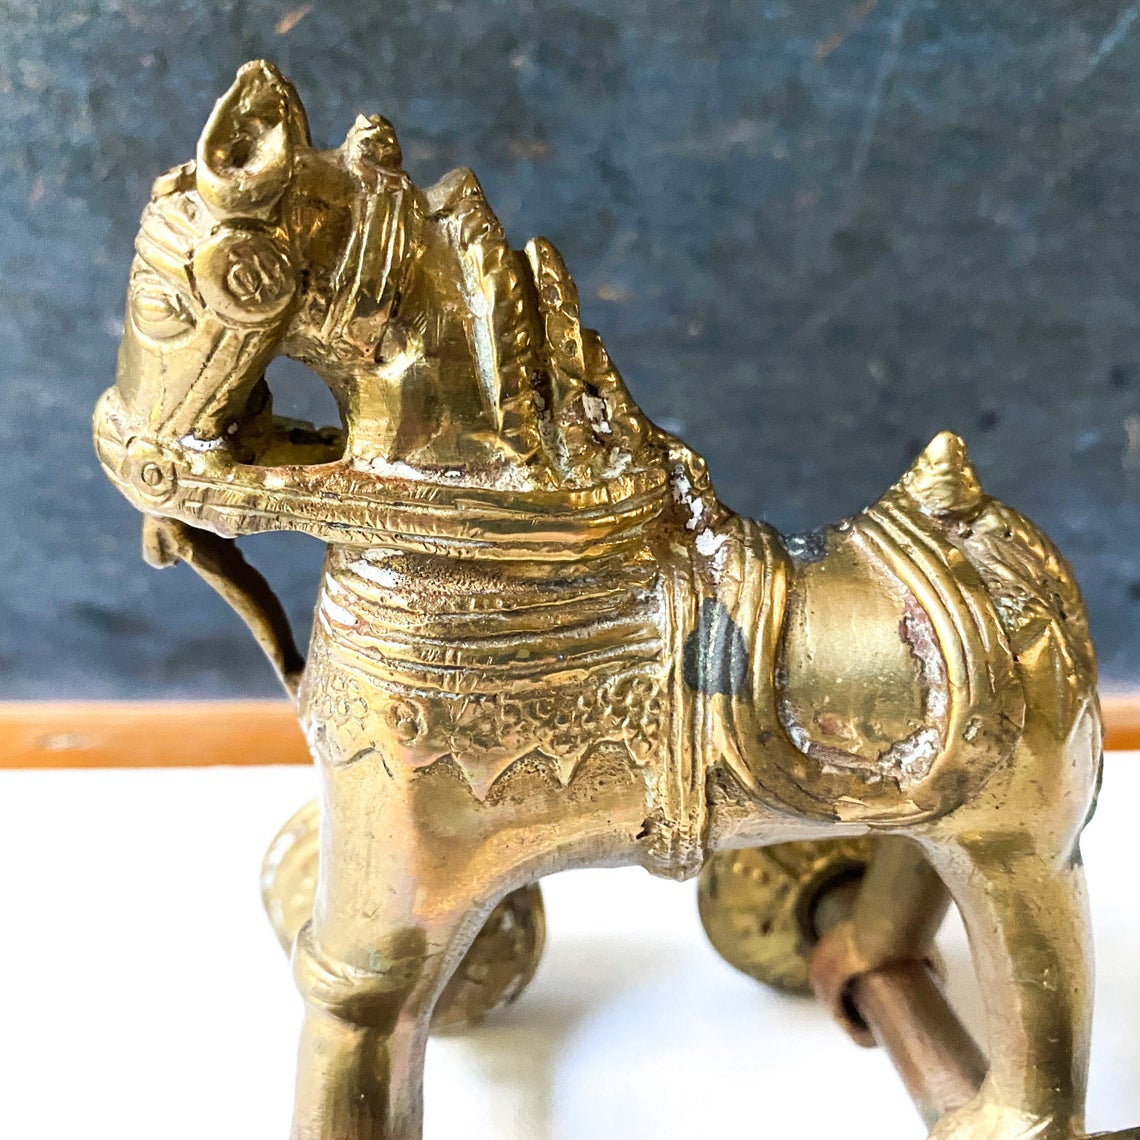 Vintage Brass Horse on Wheels, India Temple Toy, Trojan Horse Style